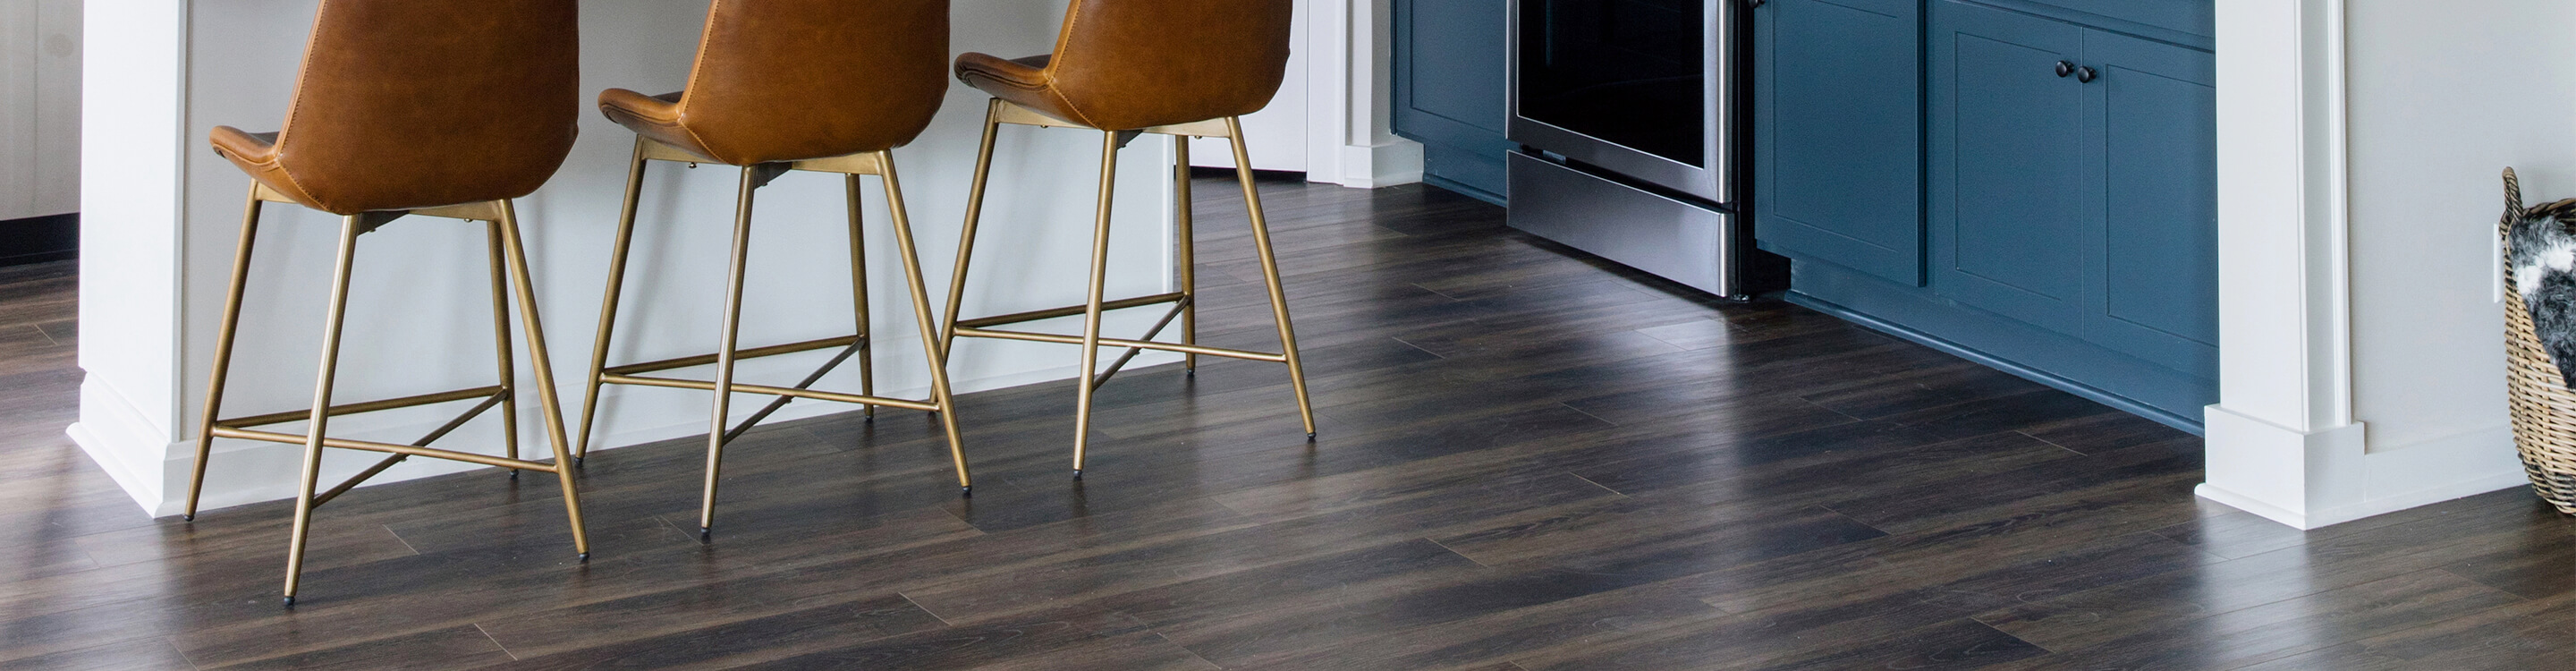 dark laminate flooring in kitchen with island and stools